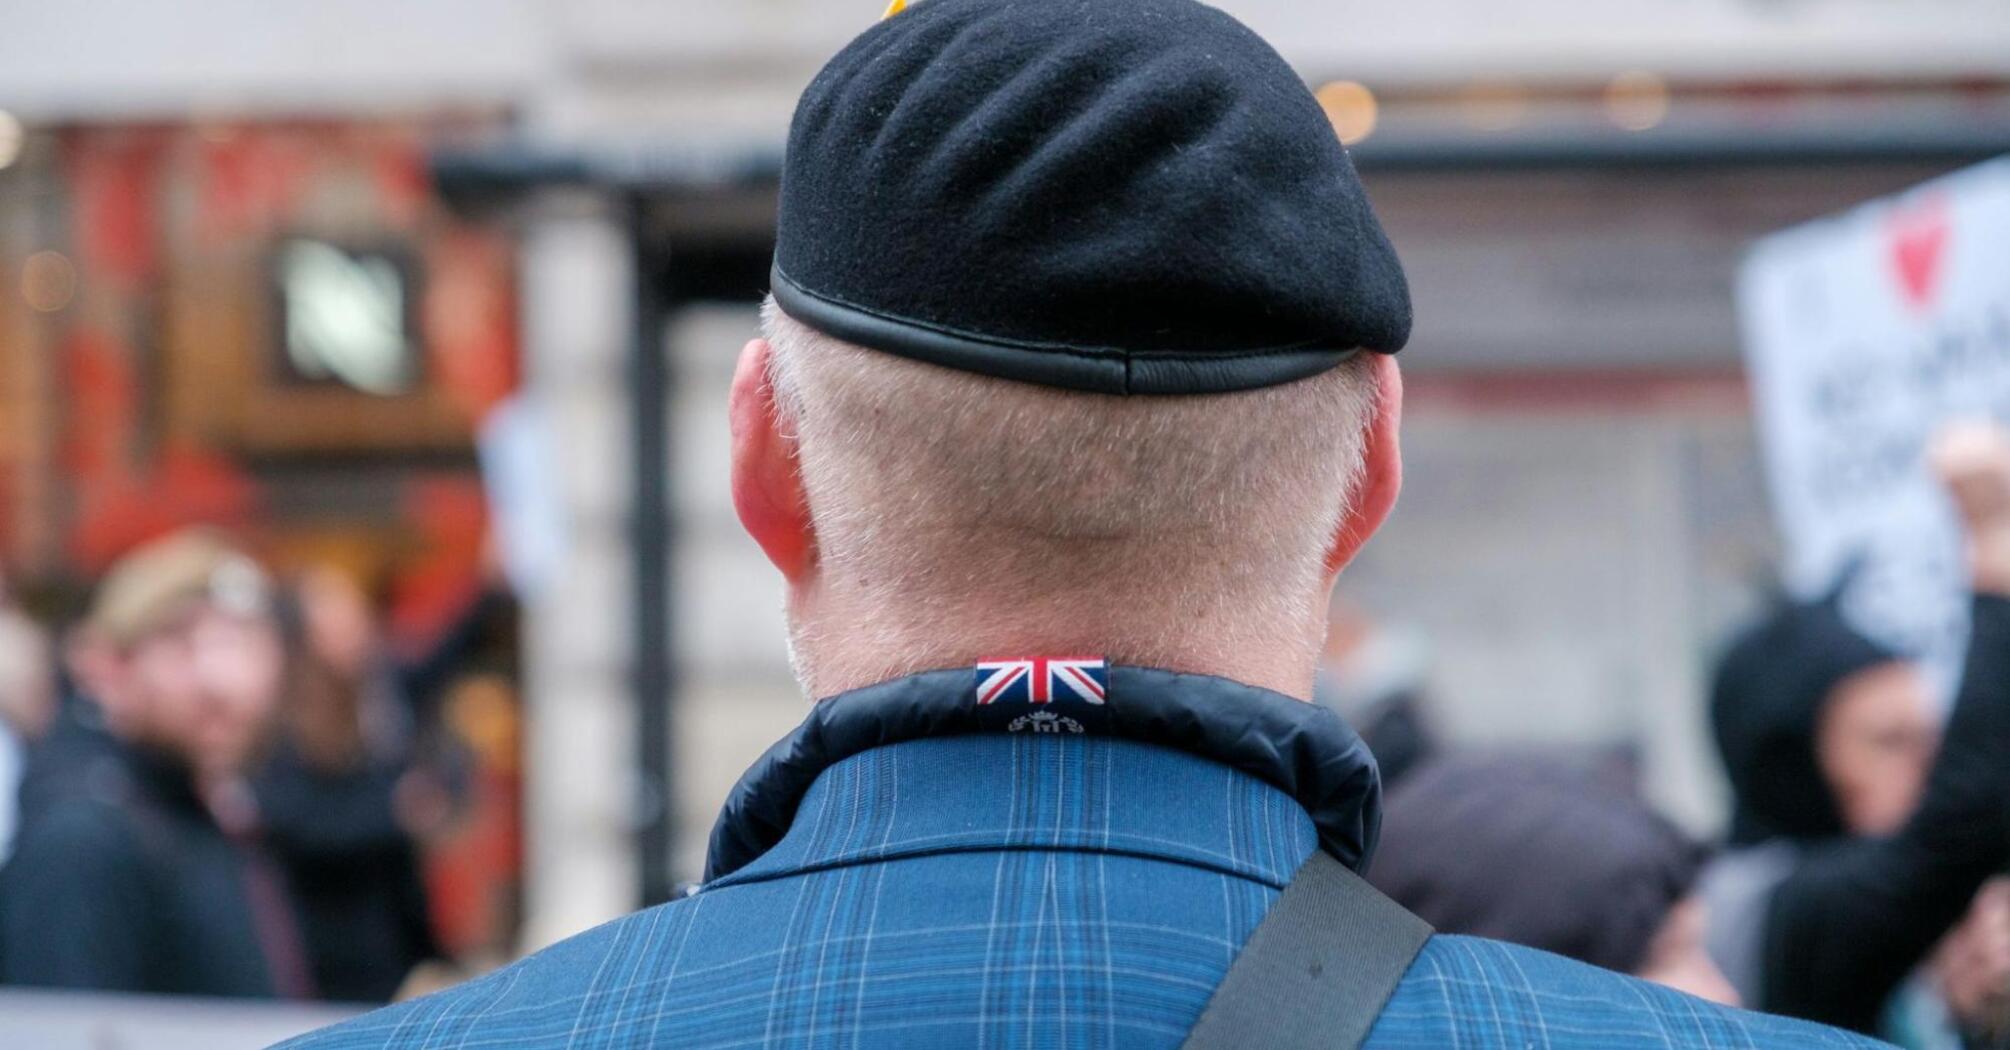 A veteran in a beret with a Union Jack emblem on his jacket collar, seen from behind at a public event